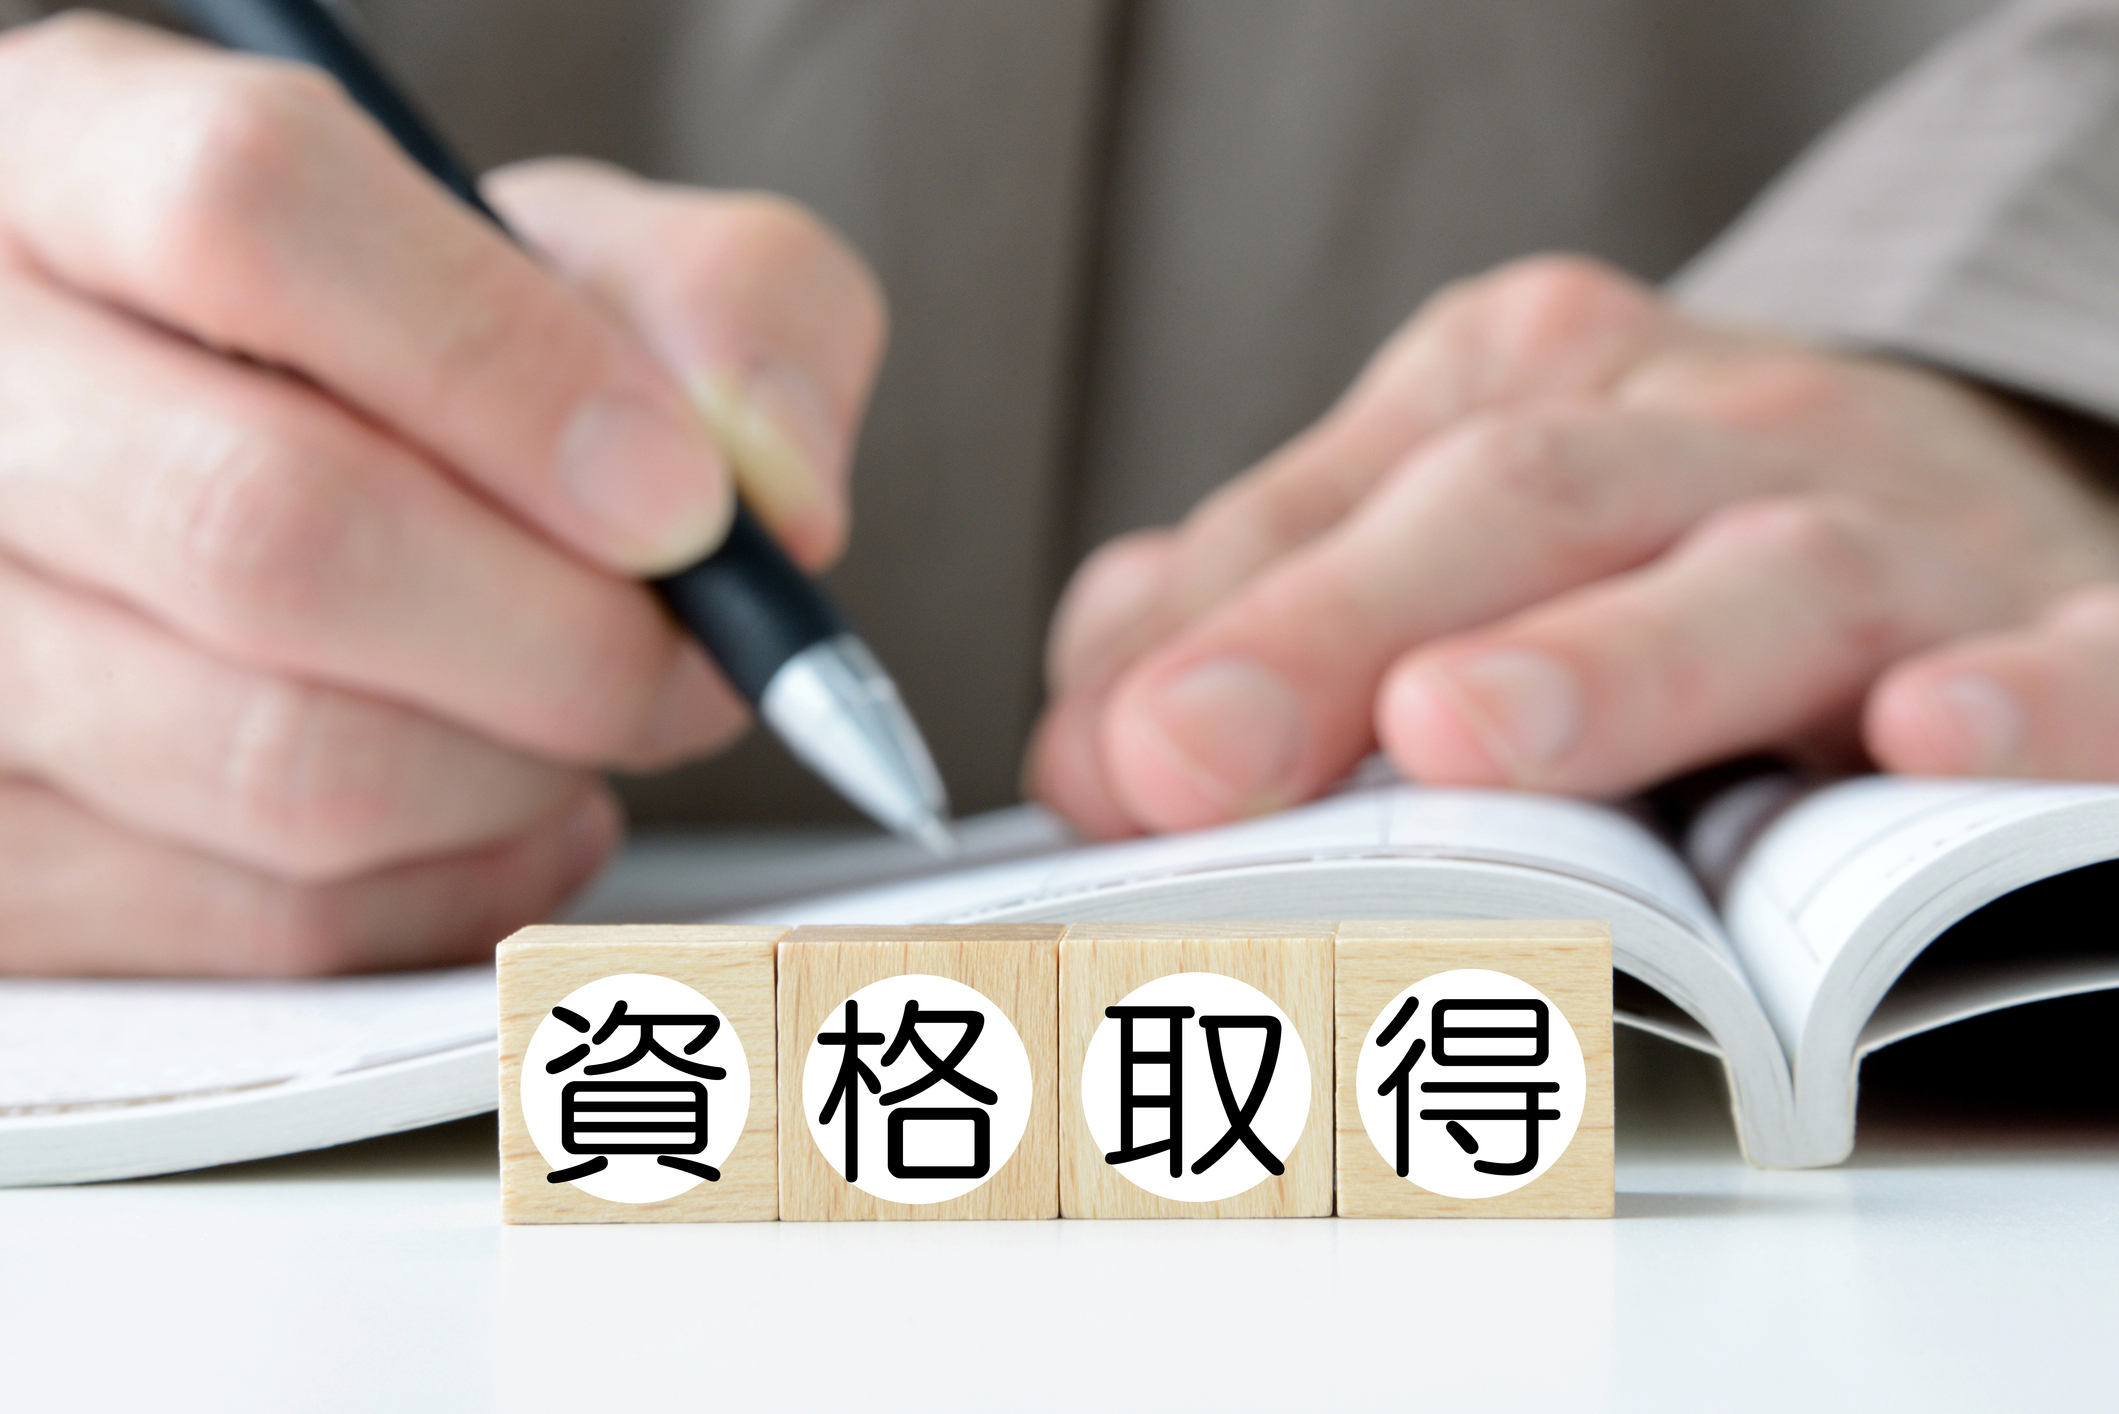 Wooden blocks with getting qualified word in Japanese and studying person